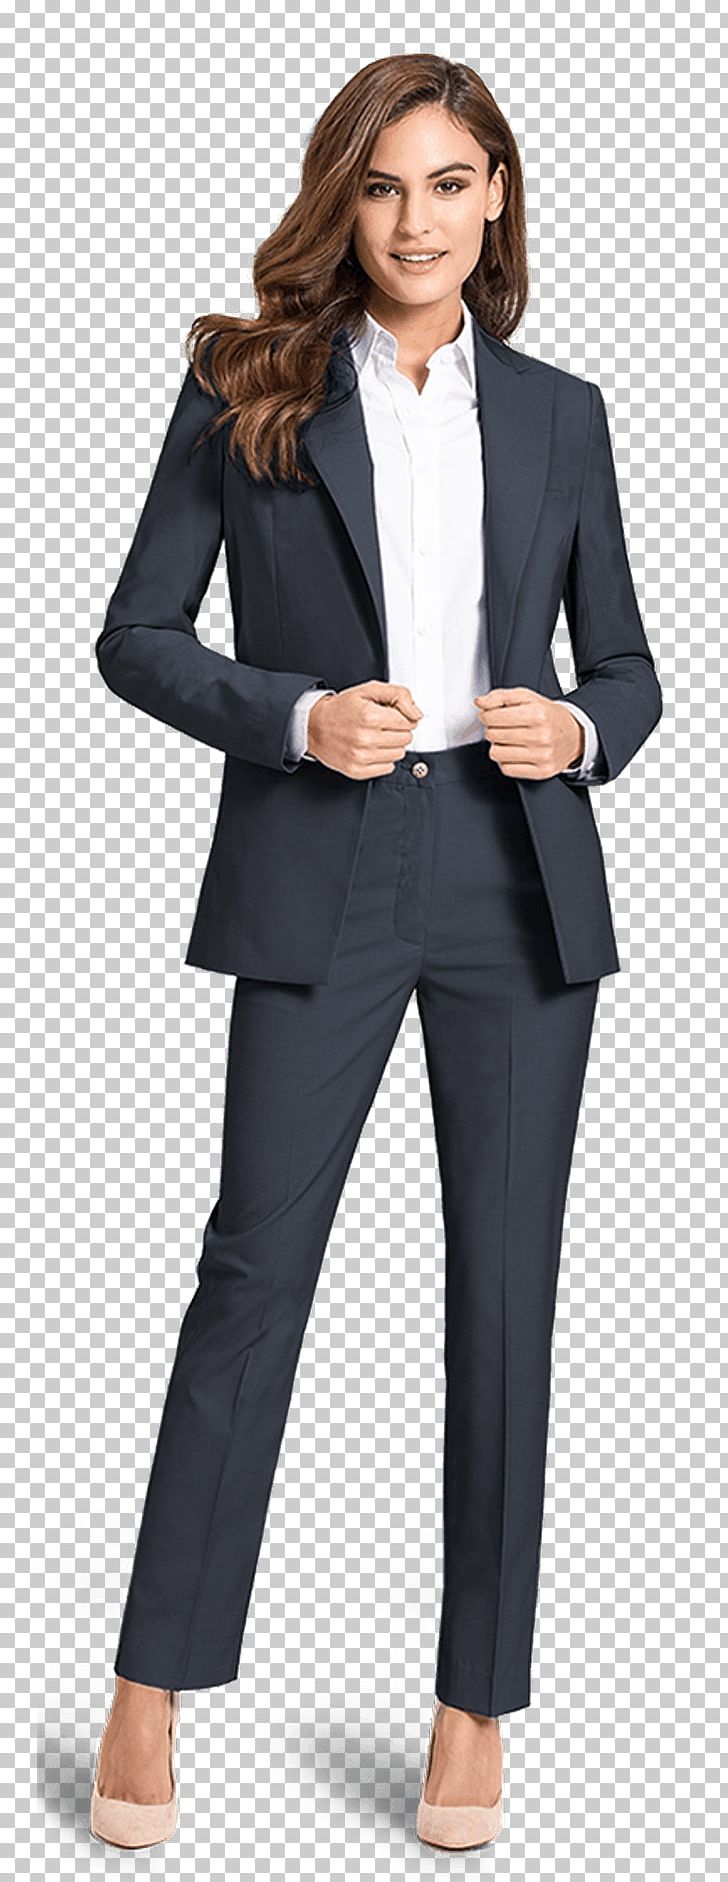 Pant Suits Clothing Pants Formal Wear PNG, Clipart, Blazer, Business, Businessperson, Clothing, Coat Free PNG Download